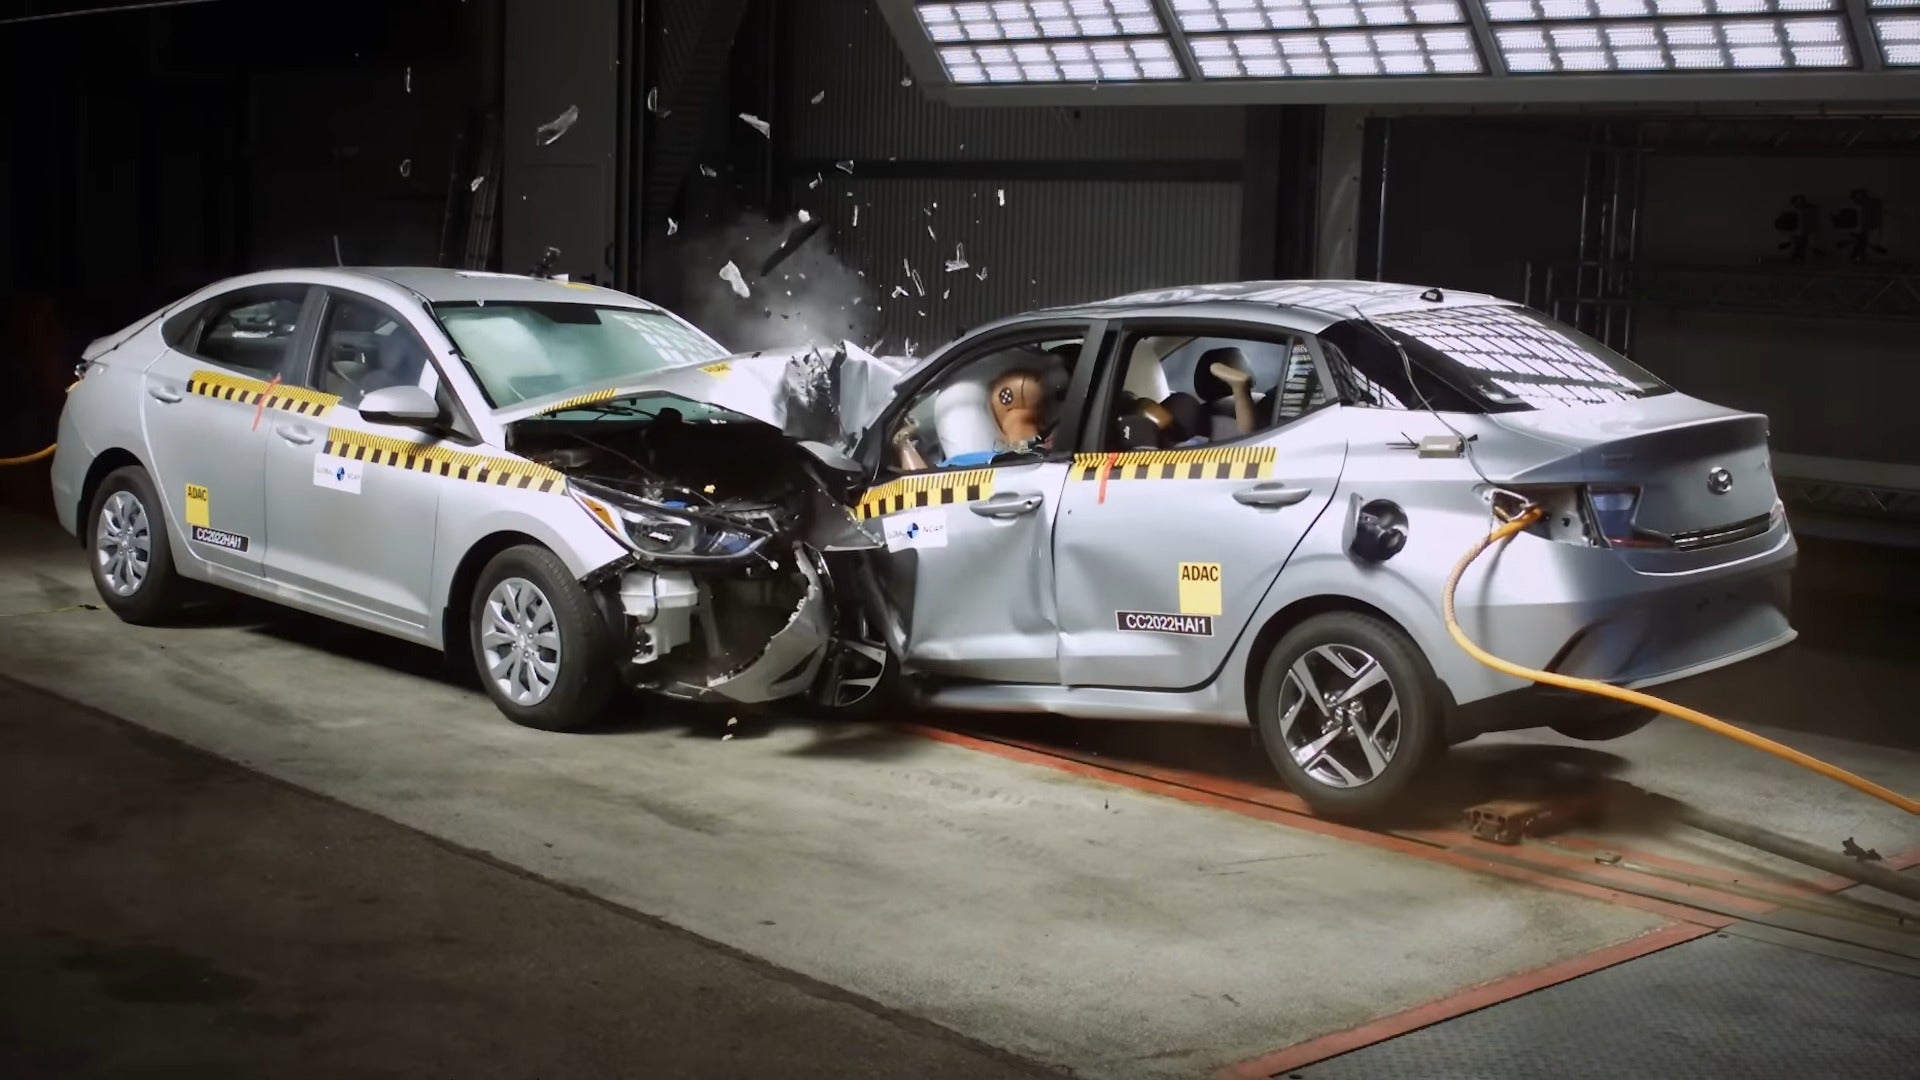 Crash Test Between US and Mexican Market Hyundais Shows How